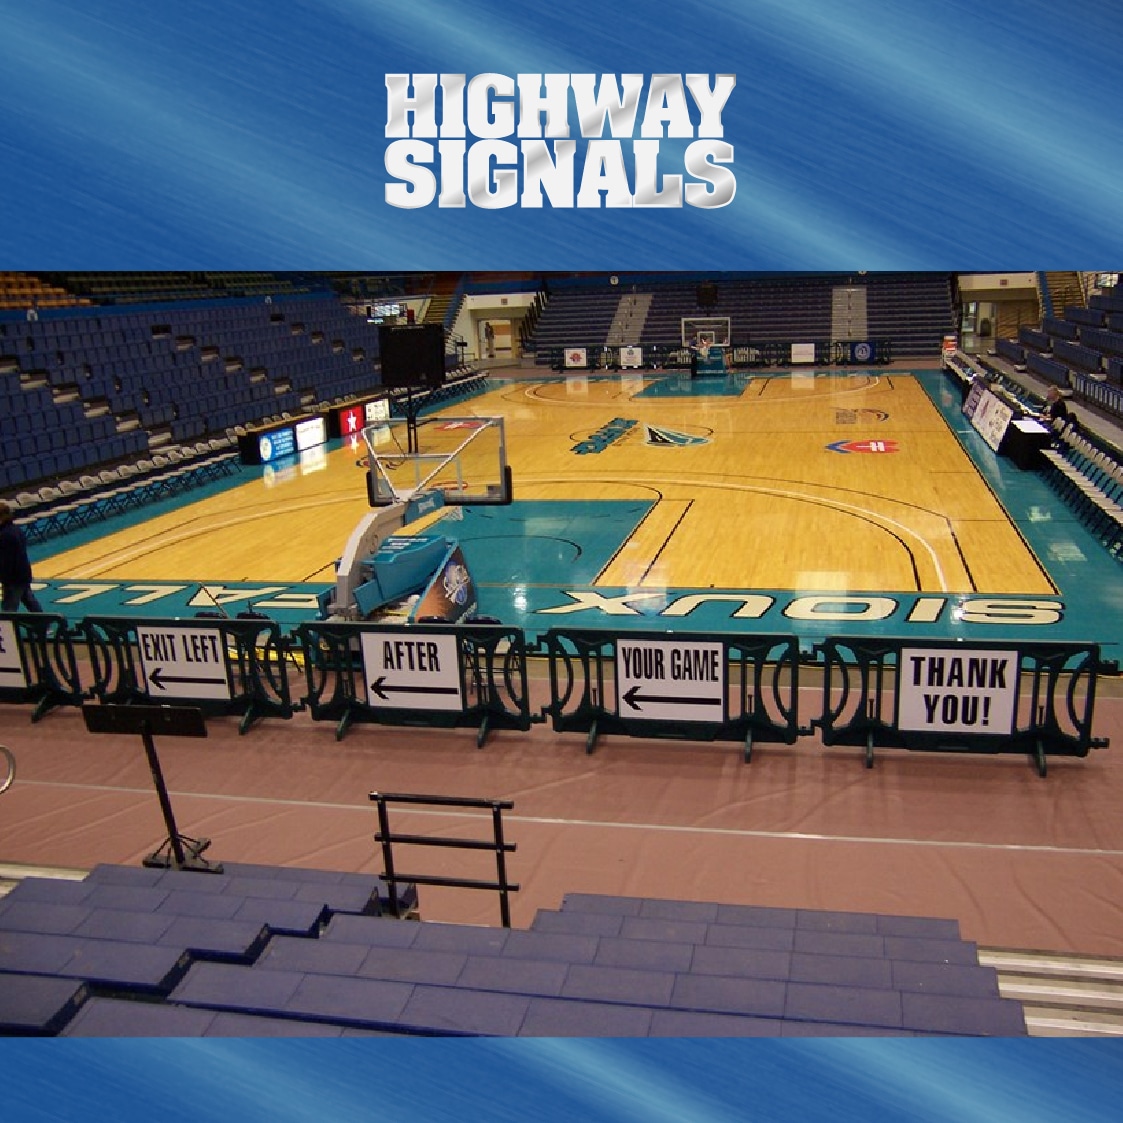 42 x 96 Barricades At A Sports Arena